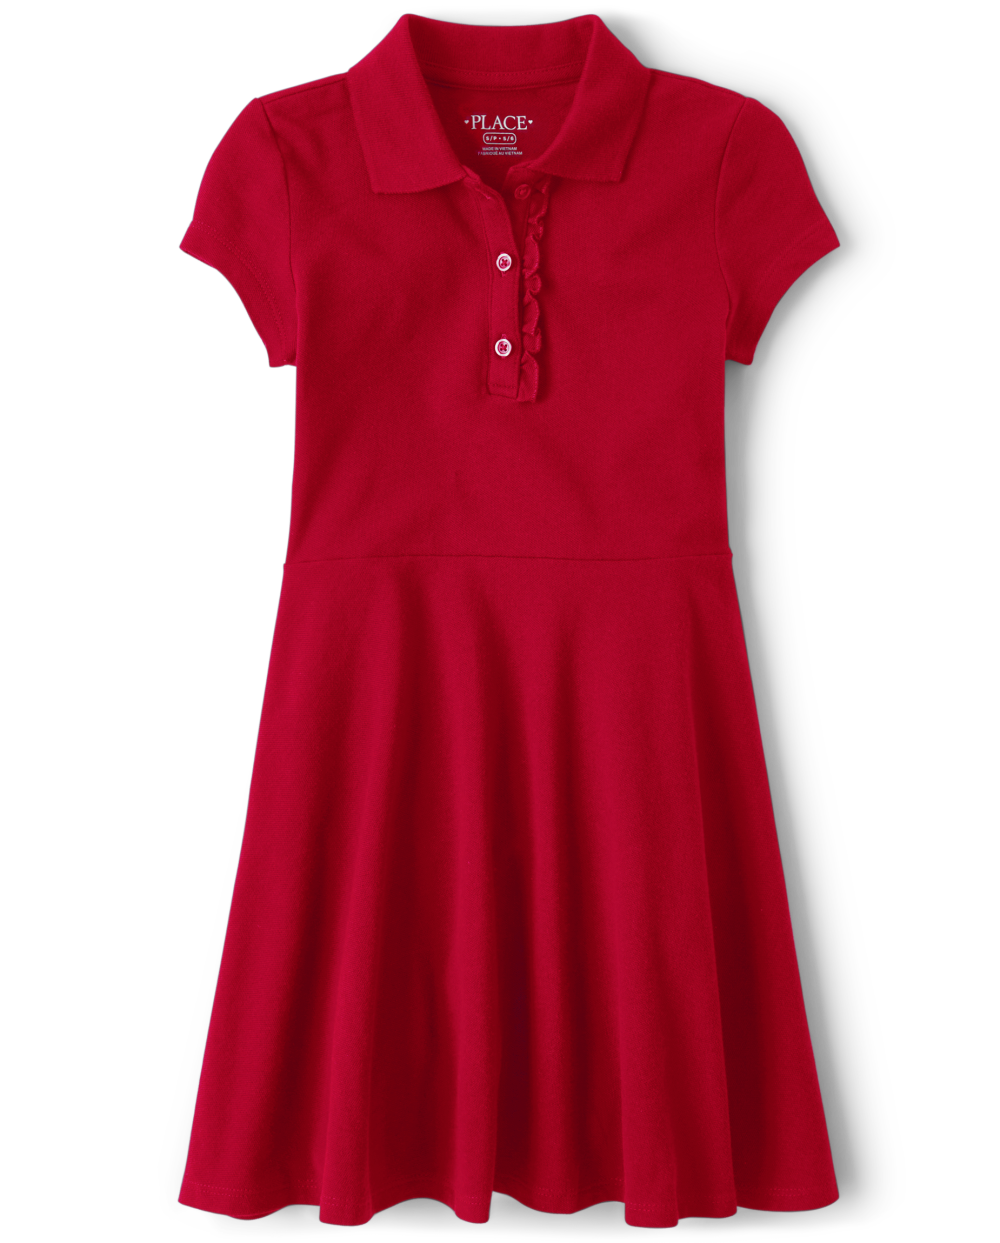 Girls Collared Ruffle Trim Above the Knee Short Sleeves Sleeves Dress